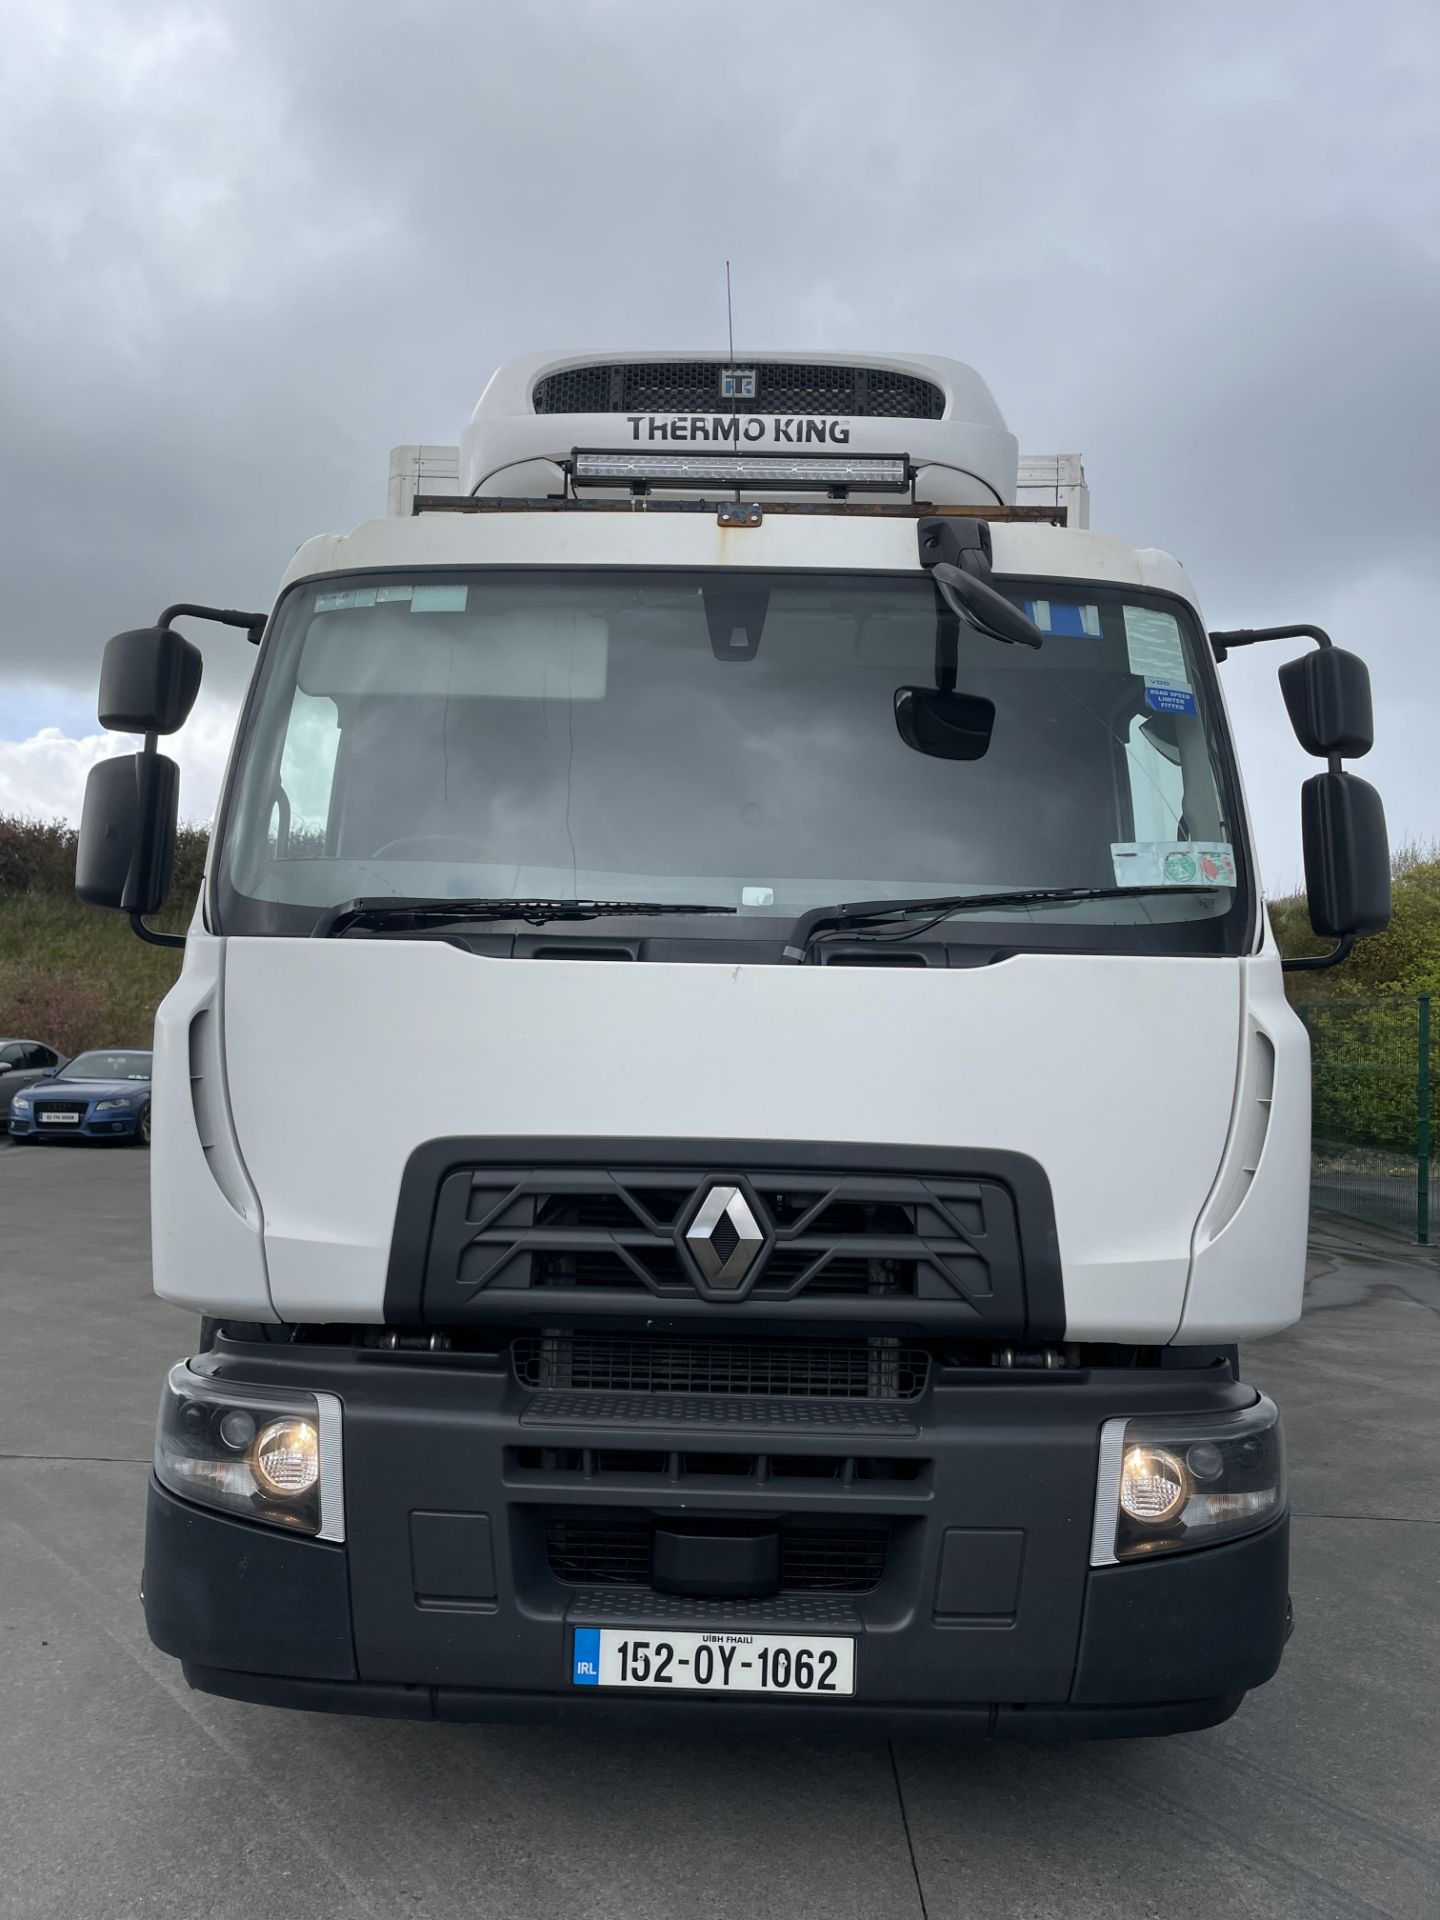 RENAULT REFRIGERATED TRUCK. 30 FT - REG 152 0Y 1062